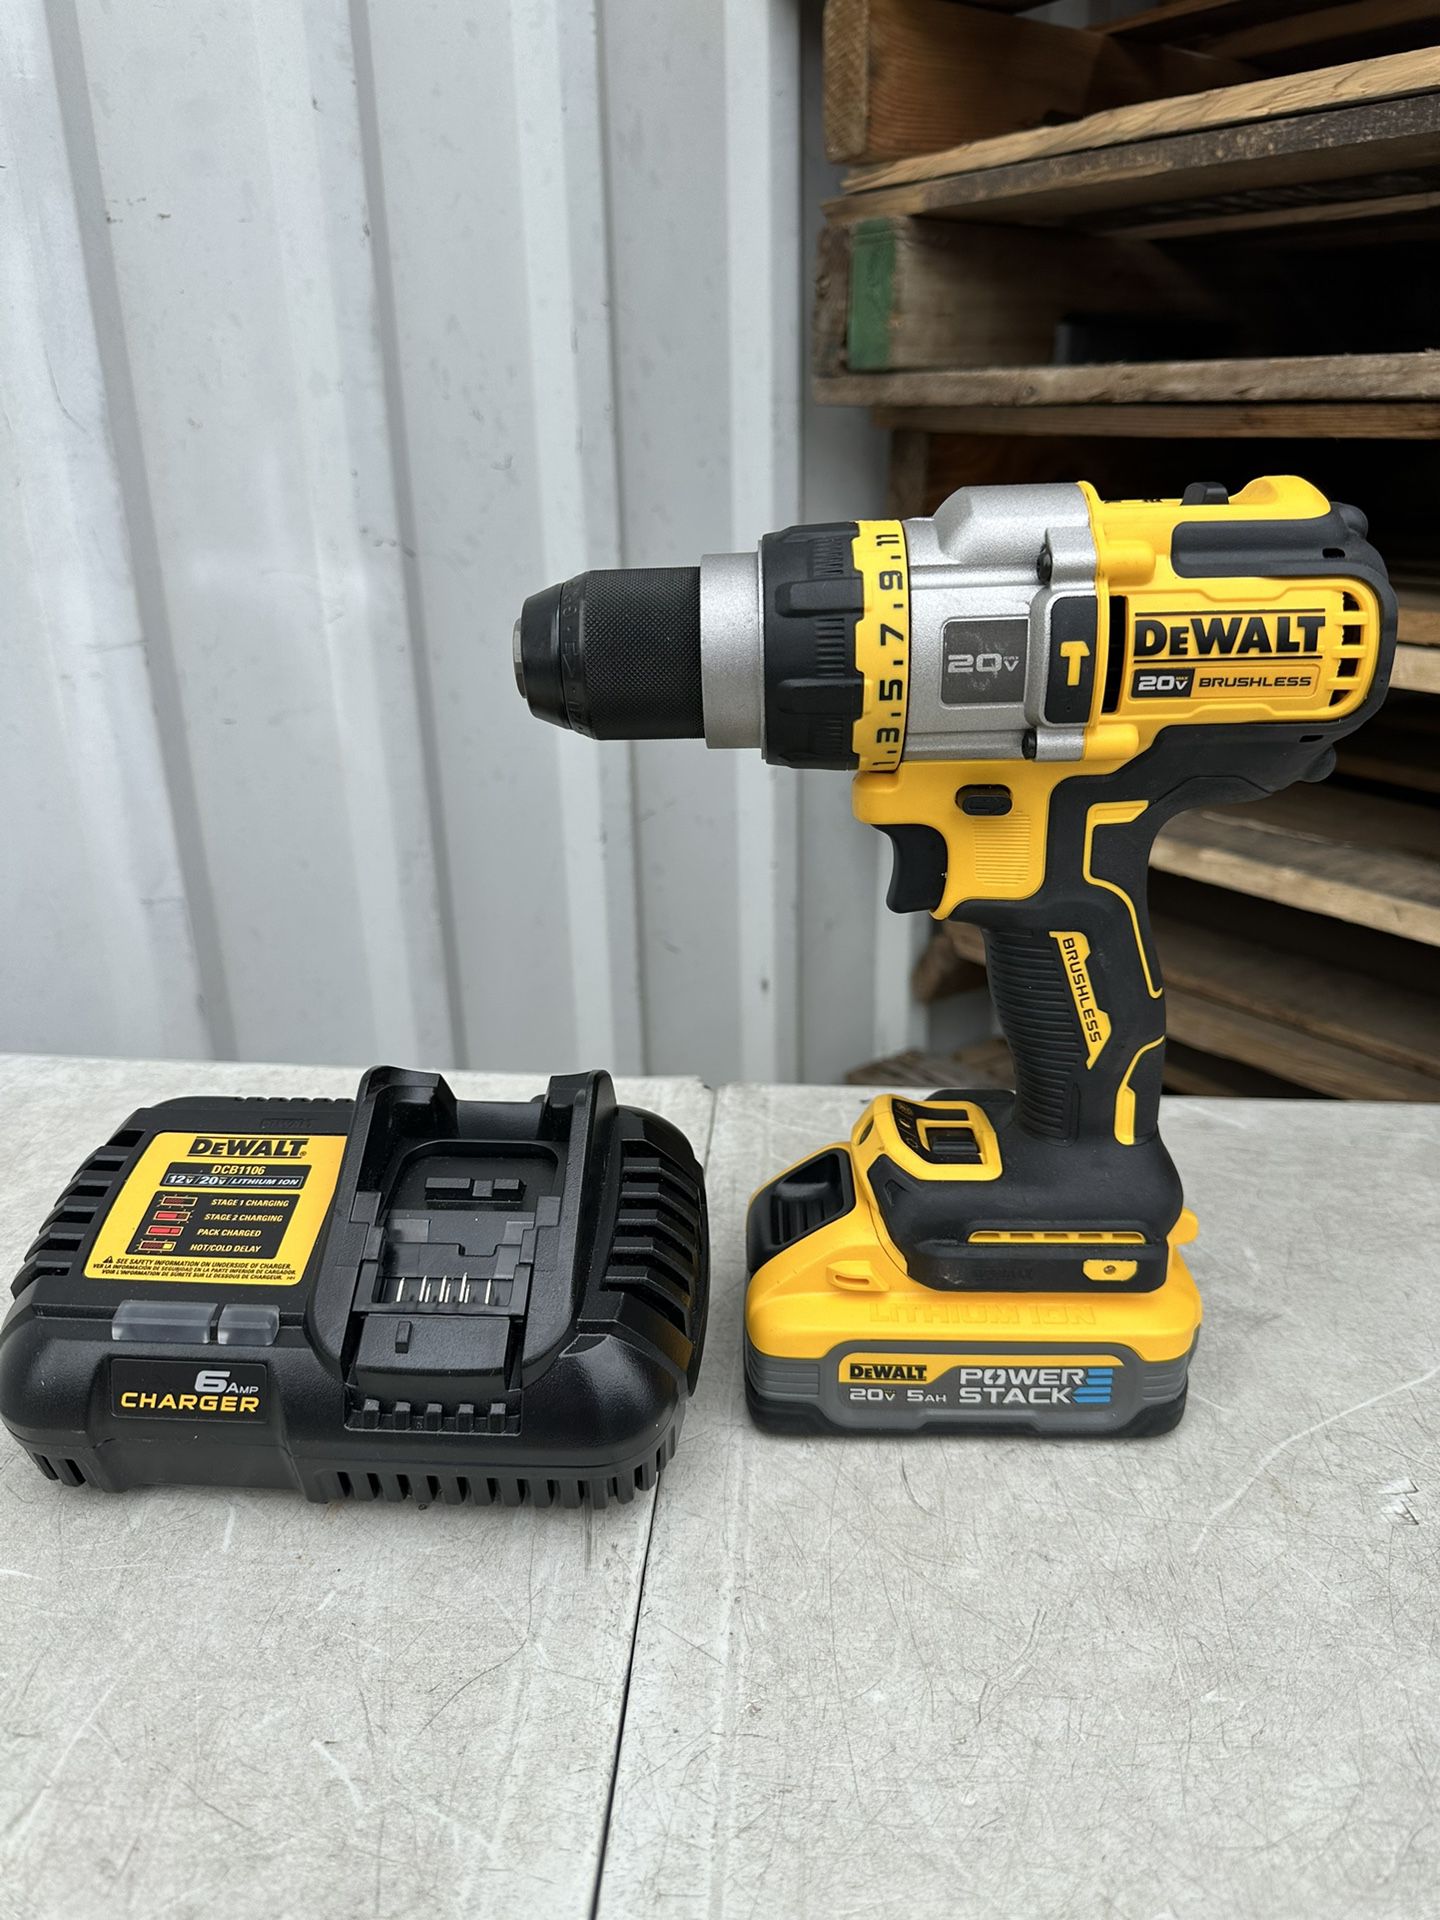 DEWALT 20V MAX Brushless Cordless 1/2 in. Hammer Drill/Driver with FLEXVOLT ADVANTAGE and 20V MAX 5.0 Battery an rapid charger New $275